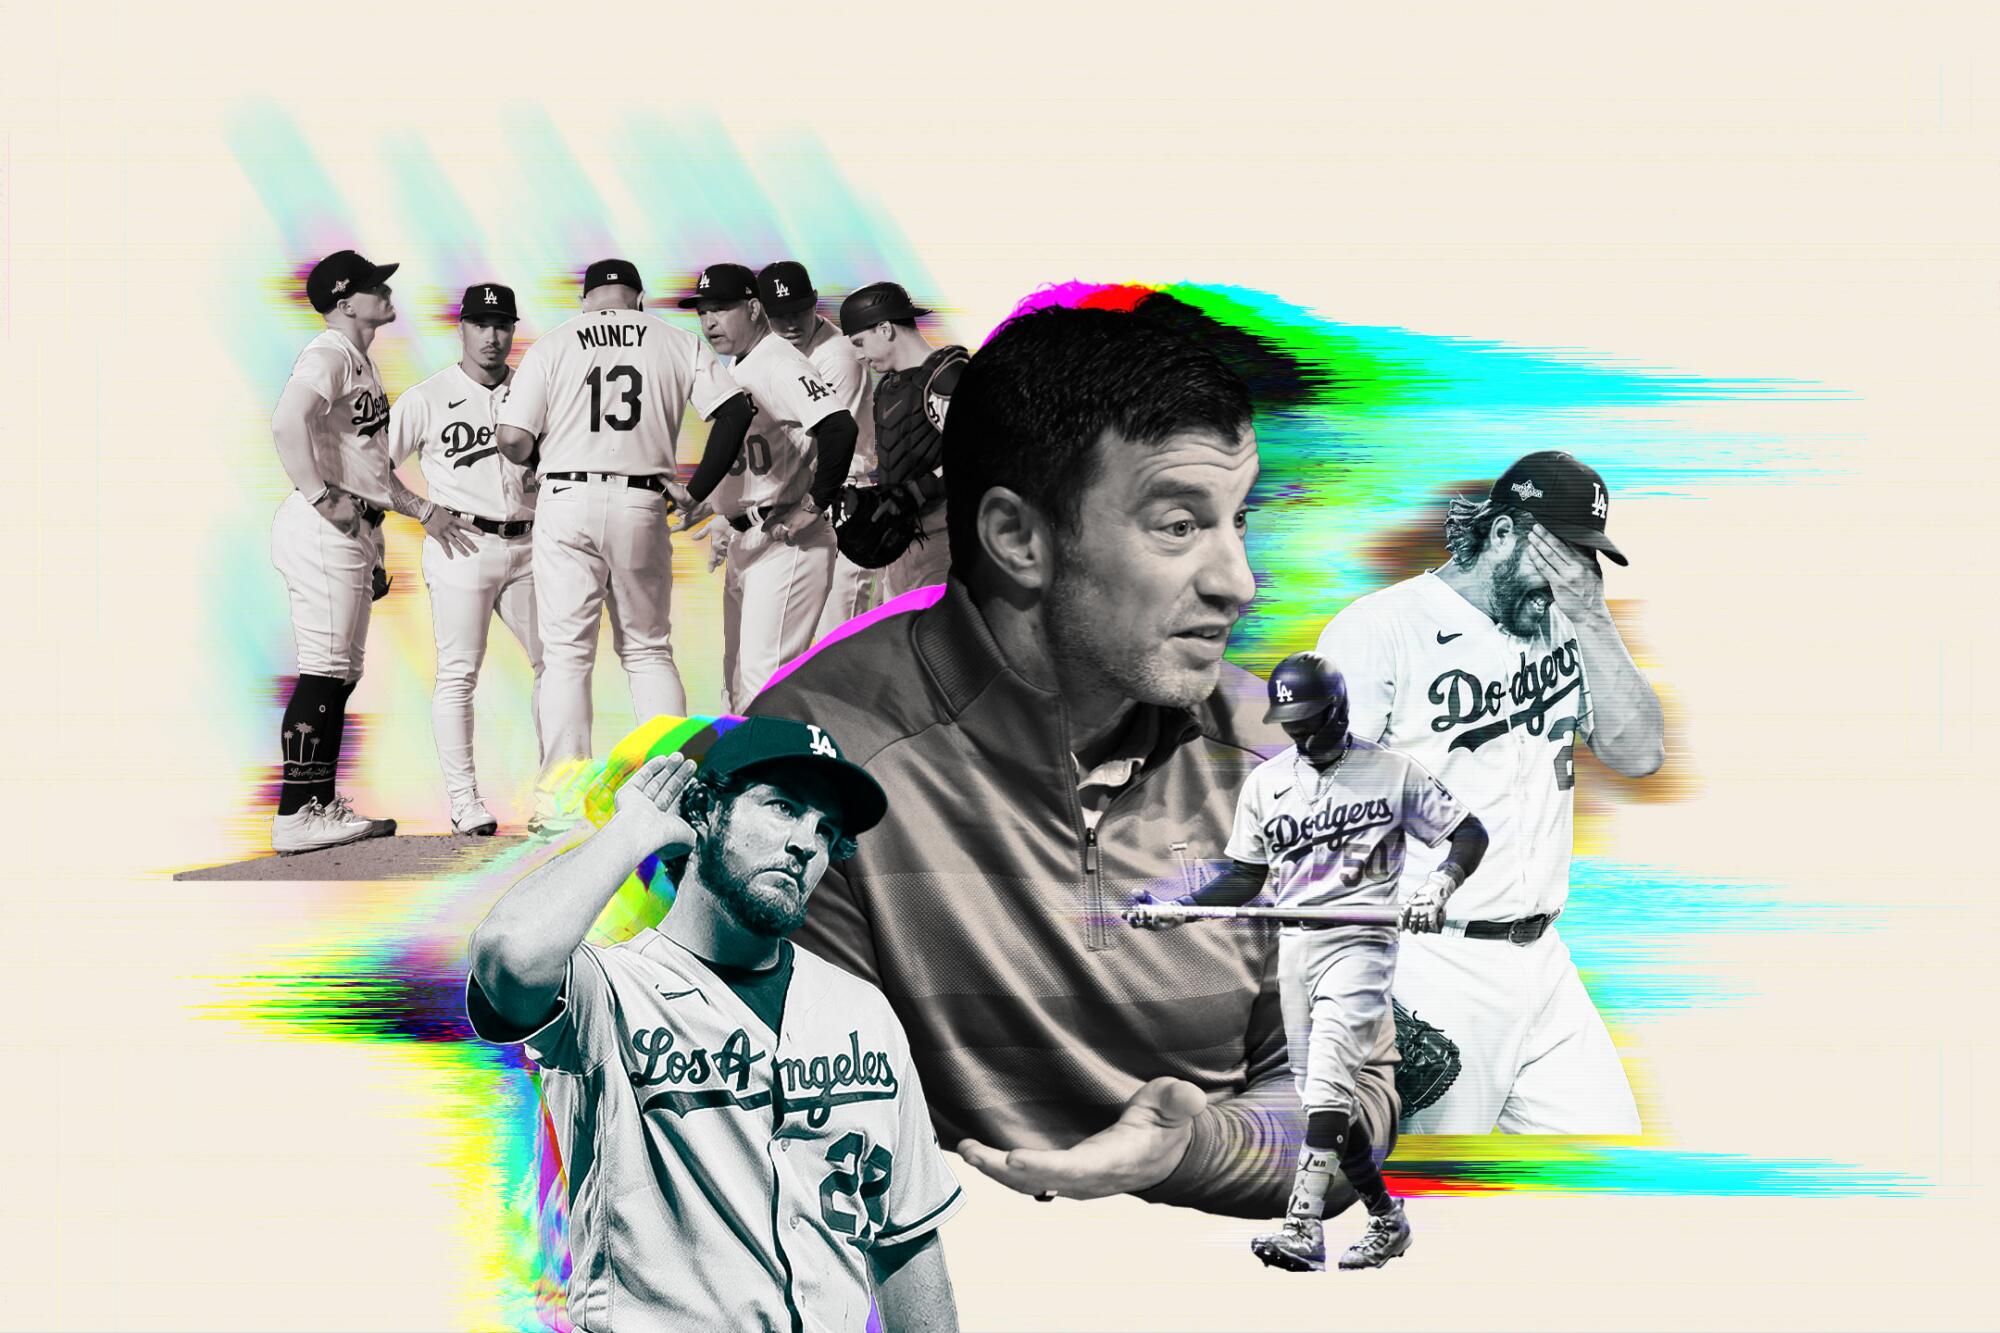 Los Angeles Dodgers fans think their team should have given young